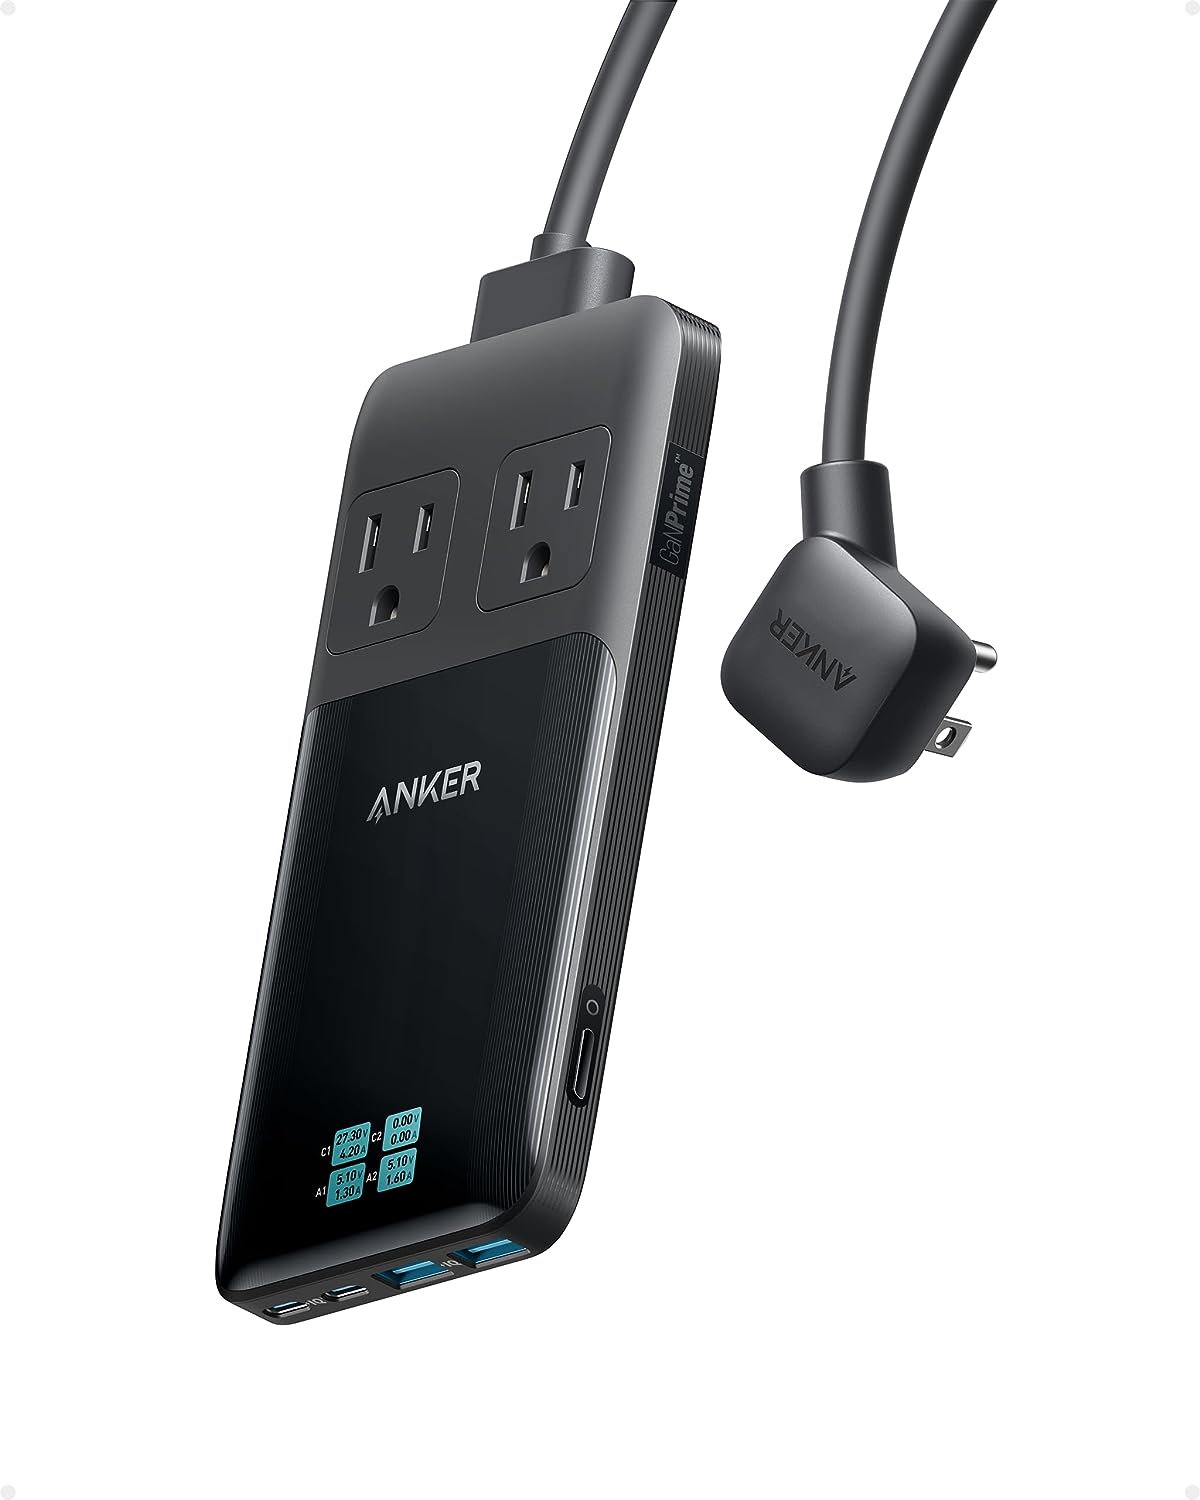 Anker Debuts New &#039;Prime Series&#039; High Speed Chargers and Power Banks